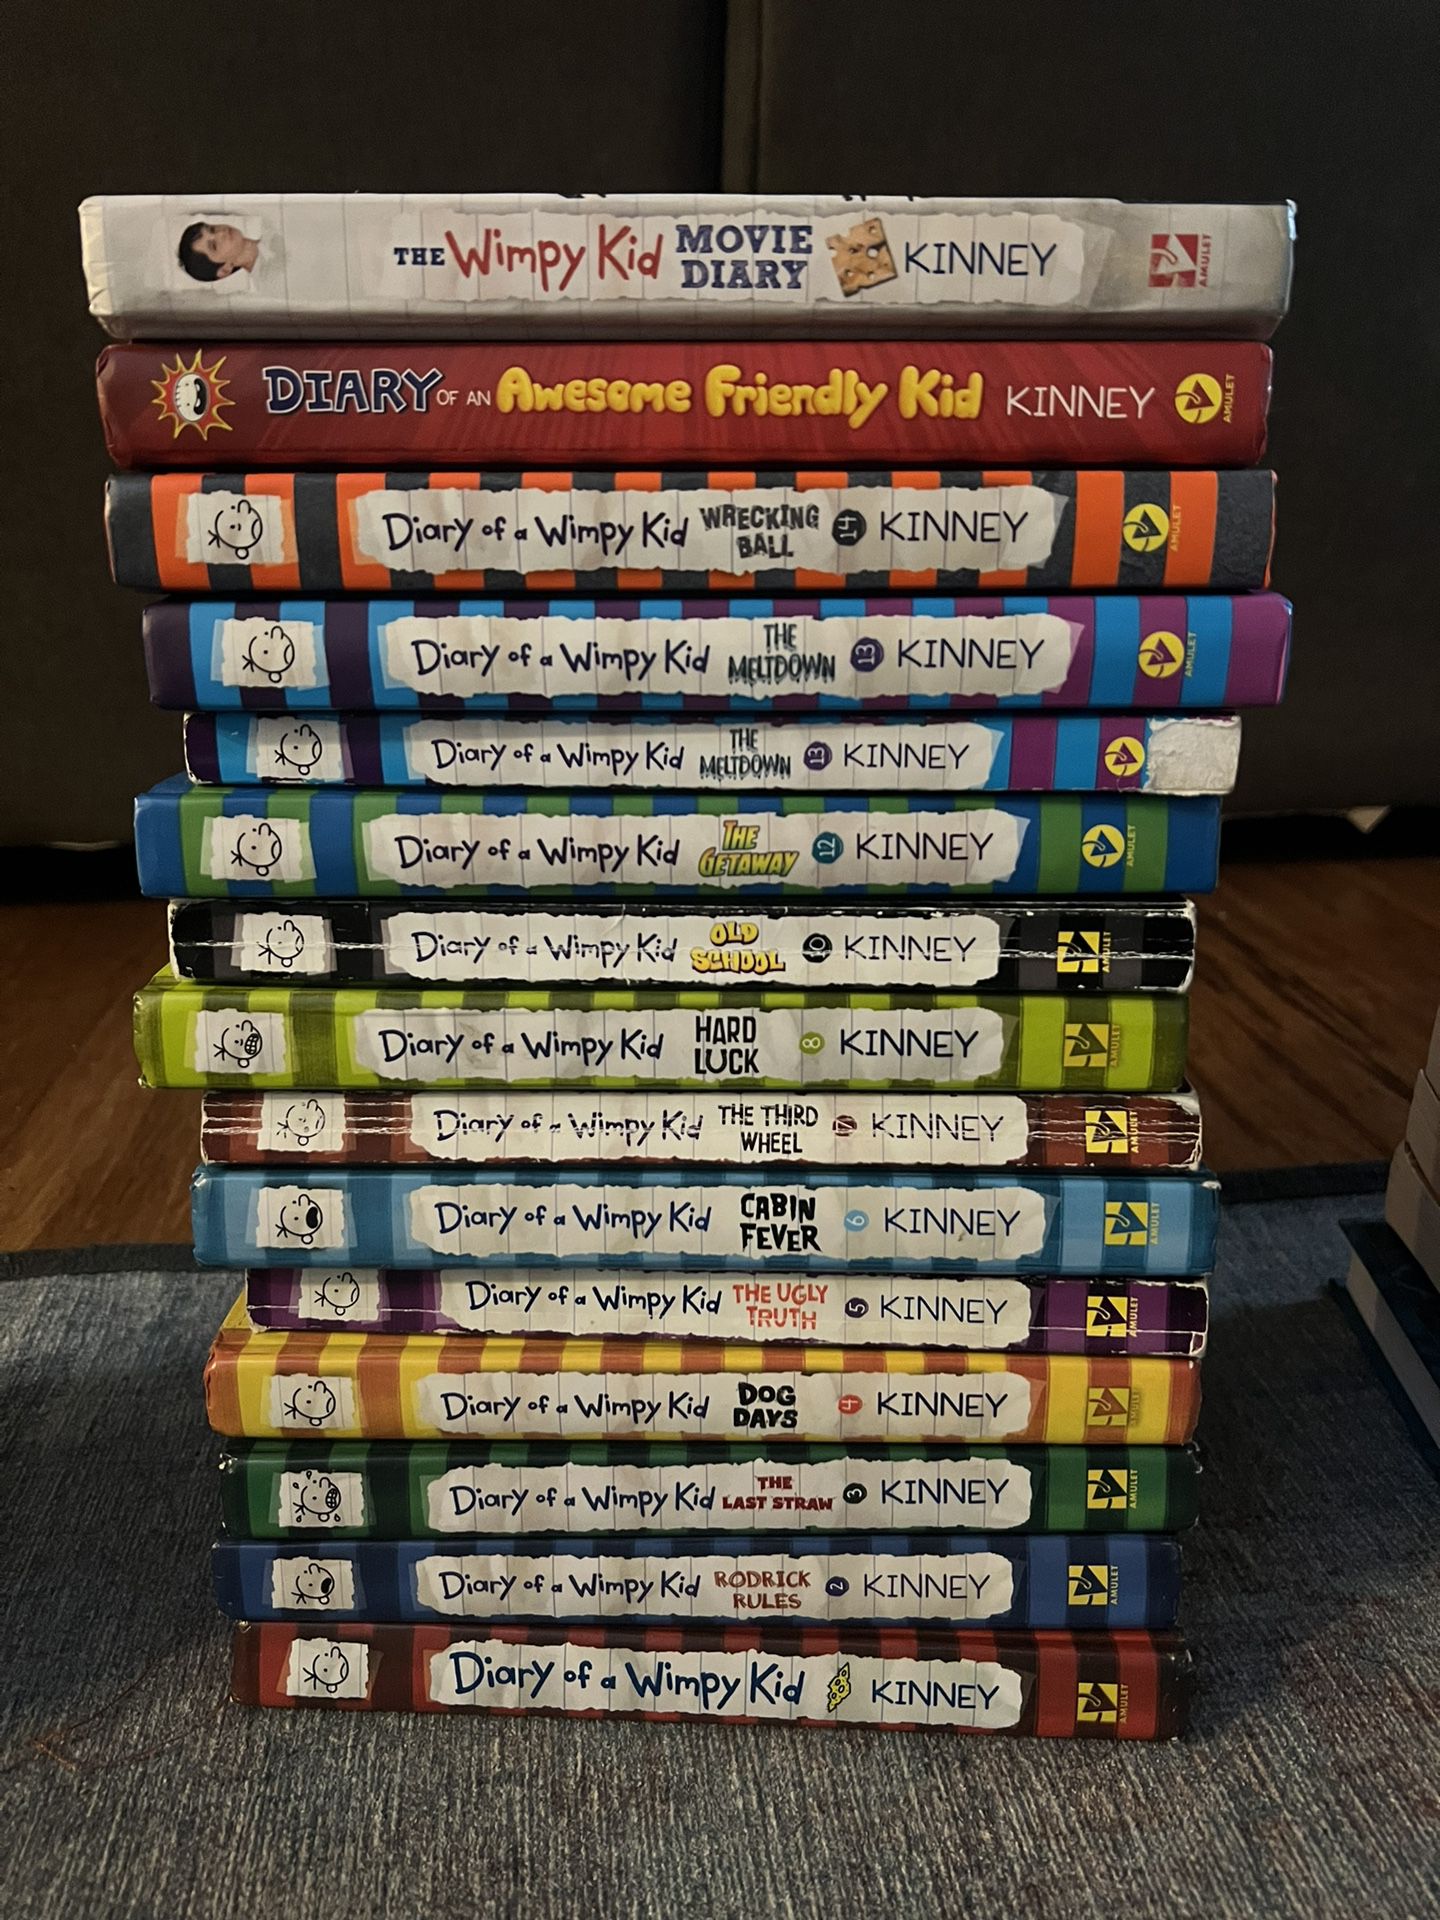 Diary Of A Wimpy Kid books